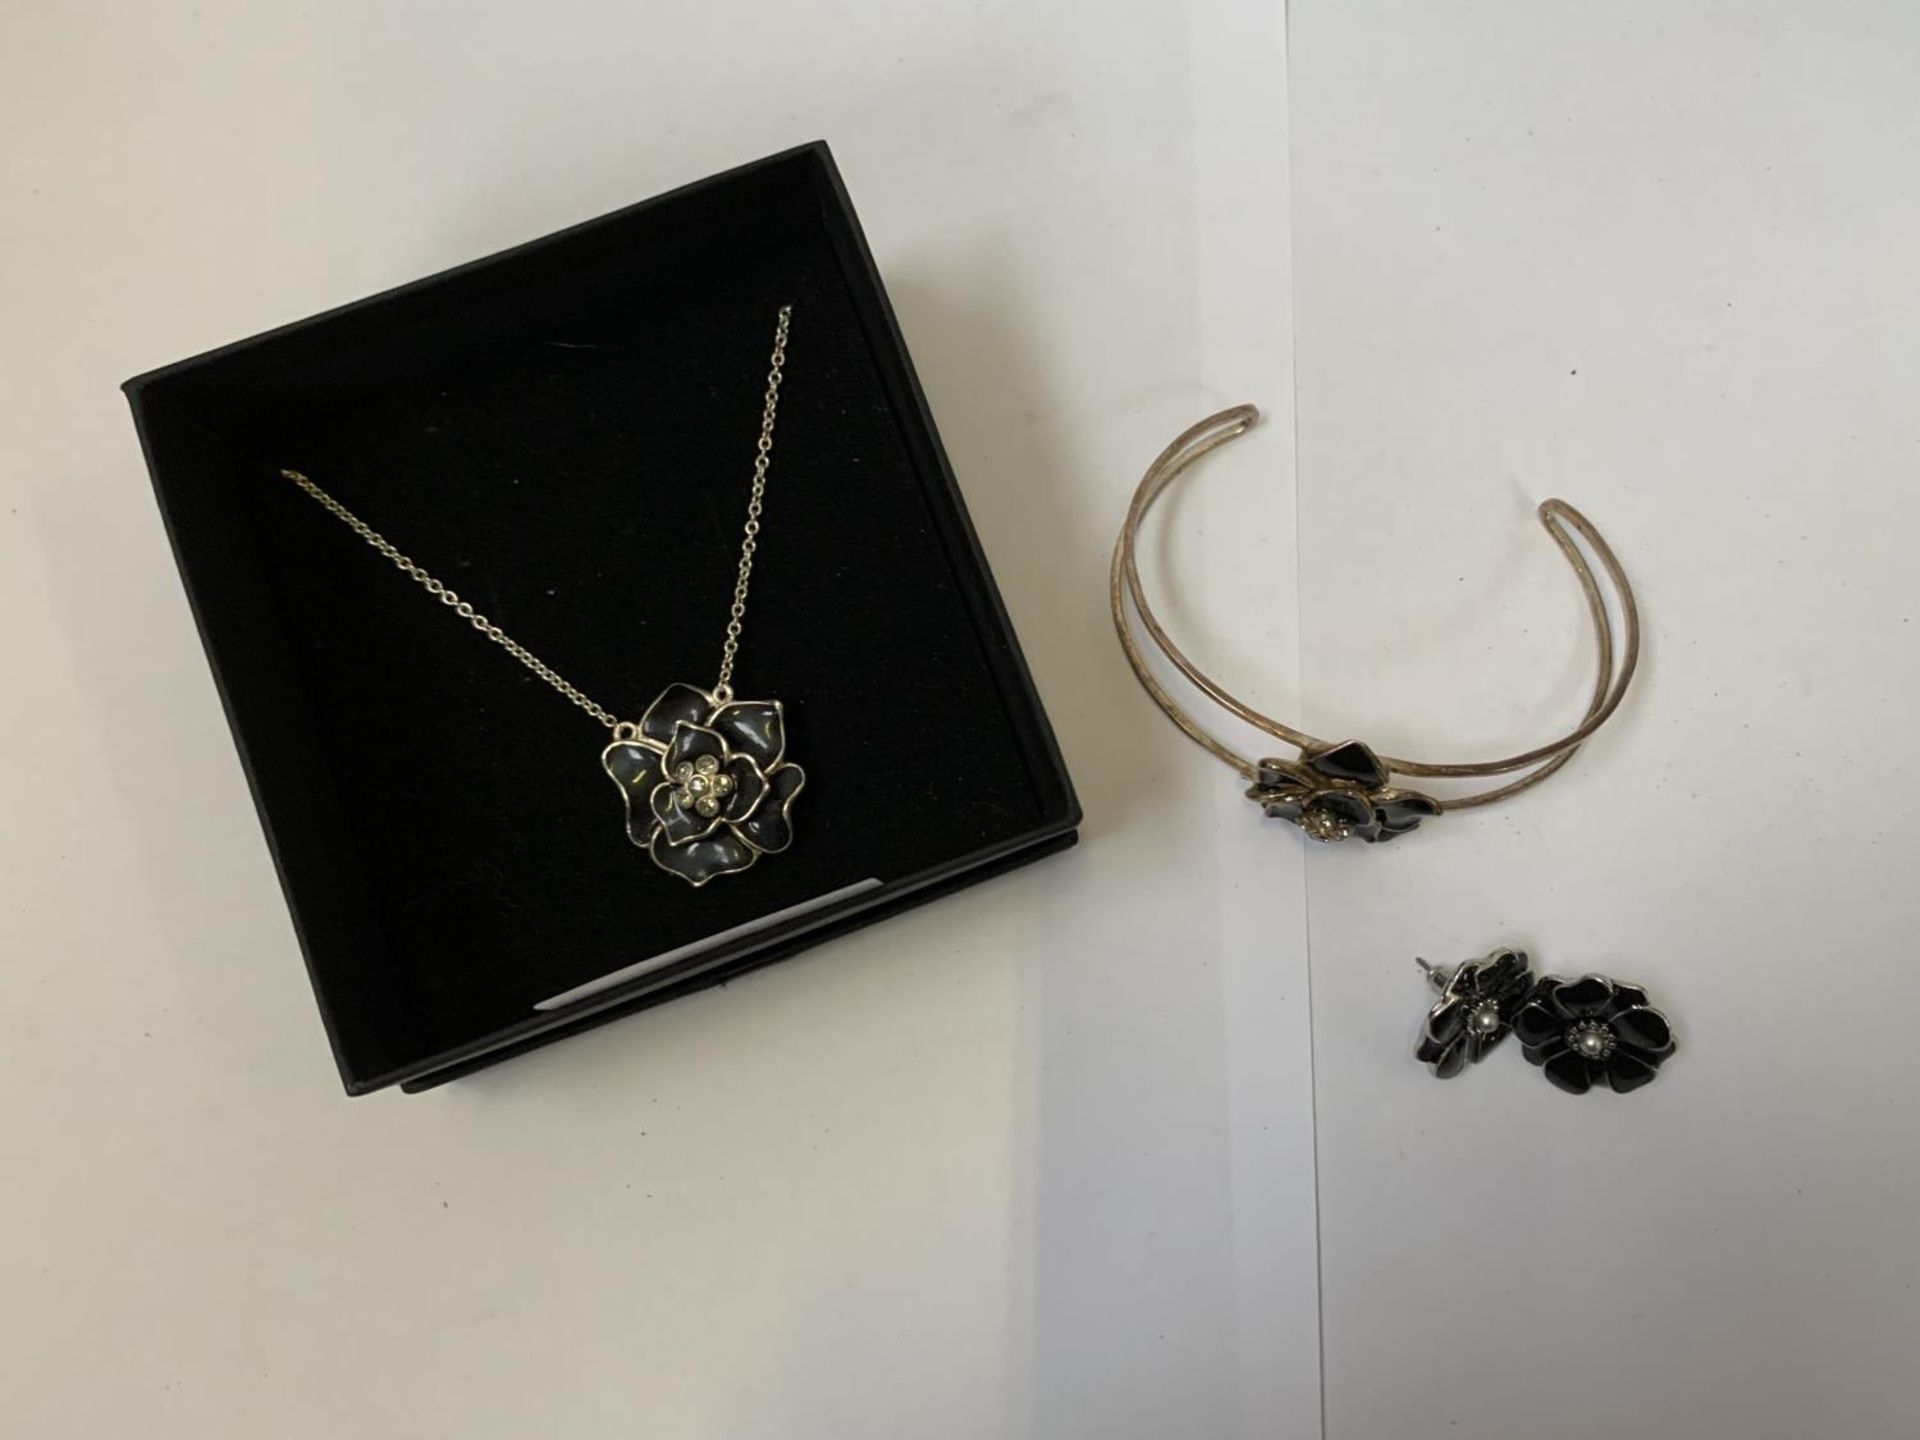 A SILVER NECKLACE, BRACELET AND EARRINGS SET WITH BLACK FLOWER DESIGNS